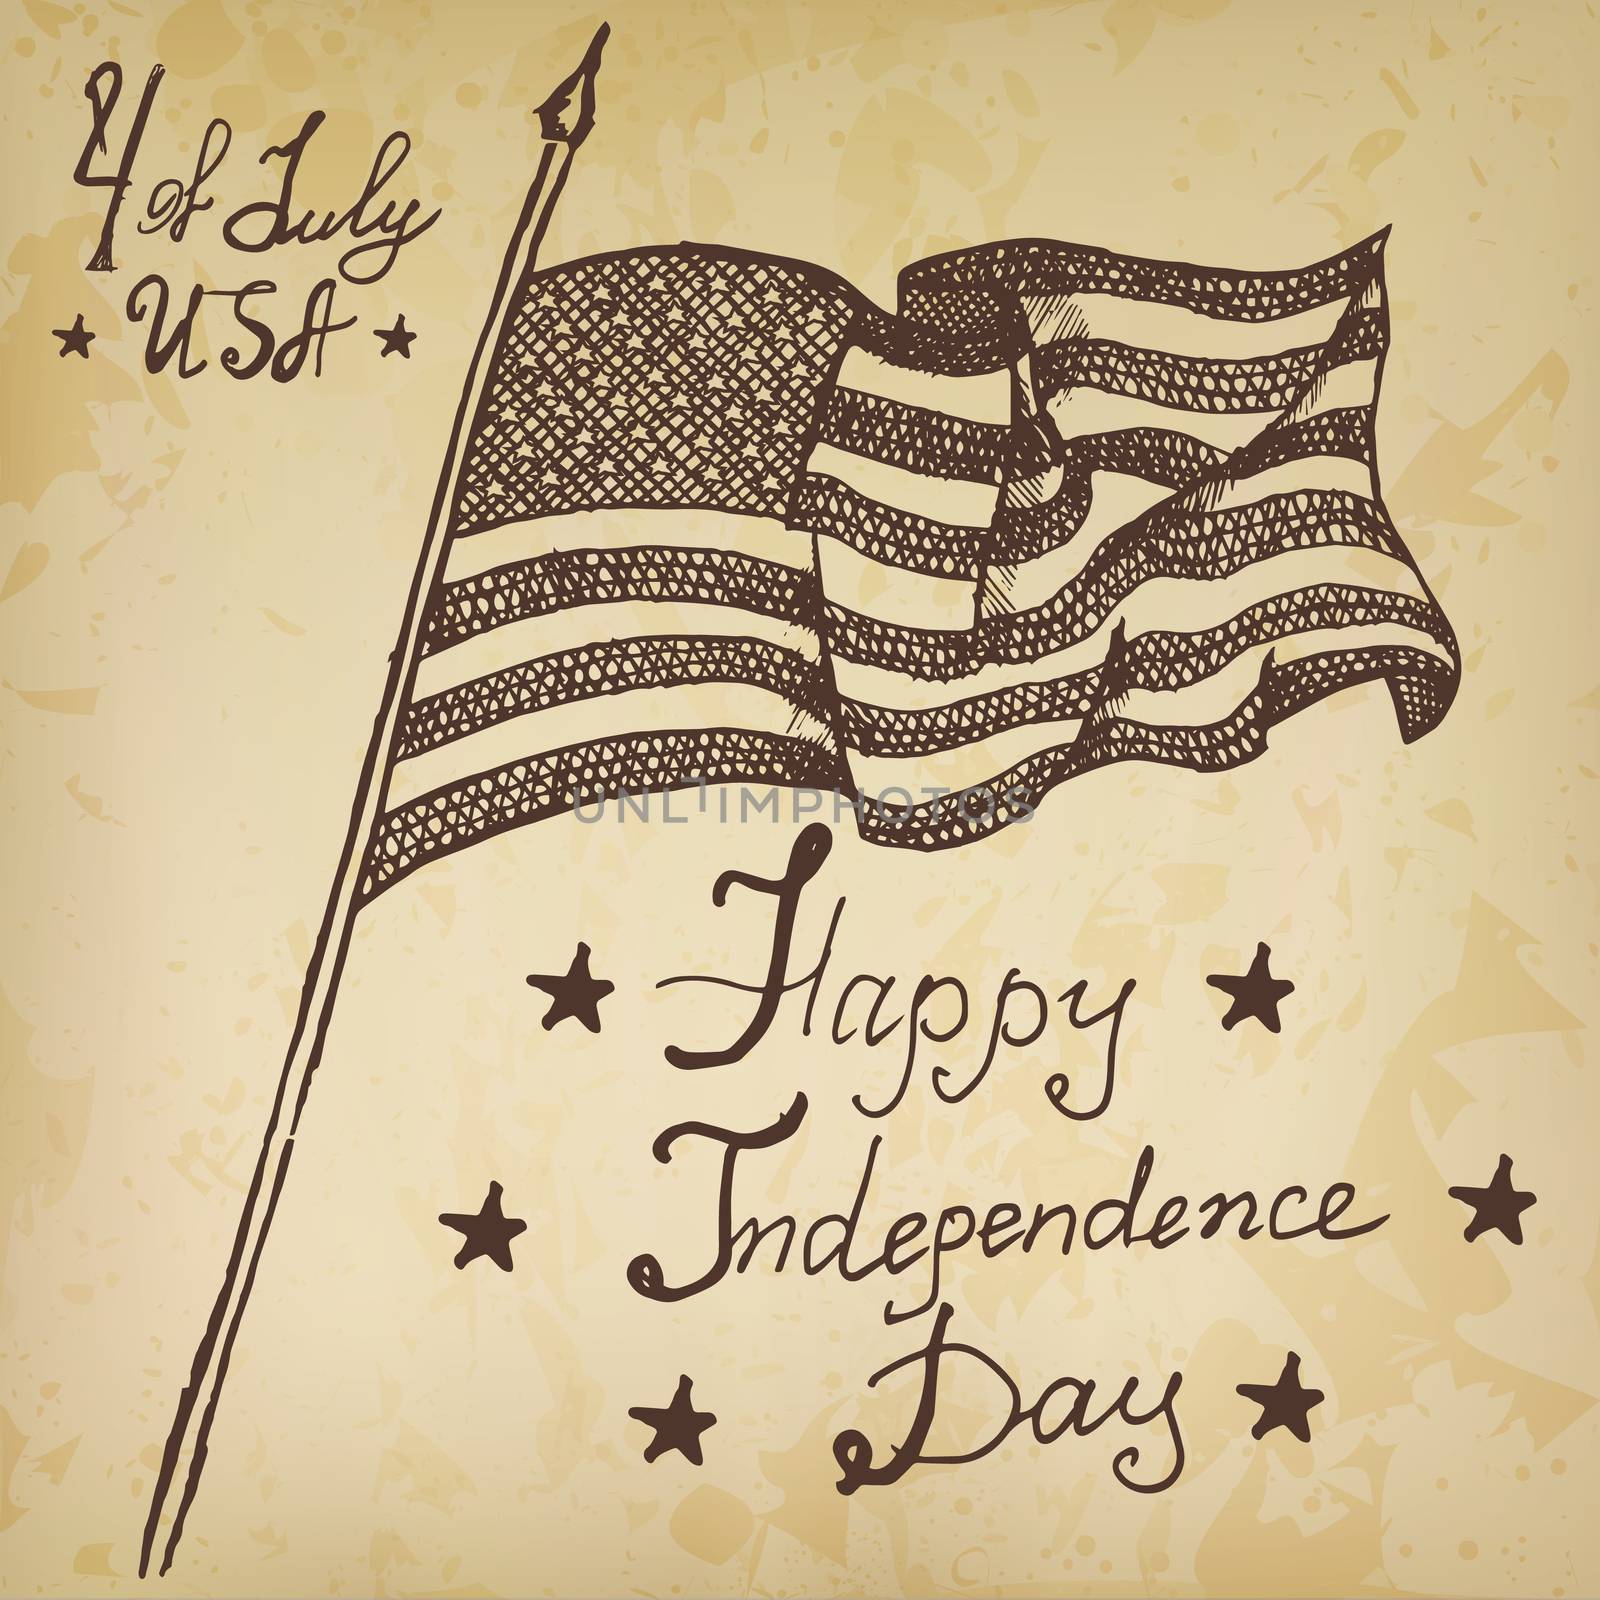 Usa waving flag, American symbol, forth of july, Hand drawn sketch, text happy independence day, vector illustration, on old paper background by Lemon_workshop